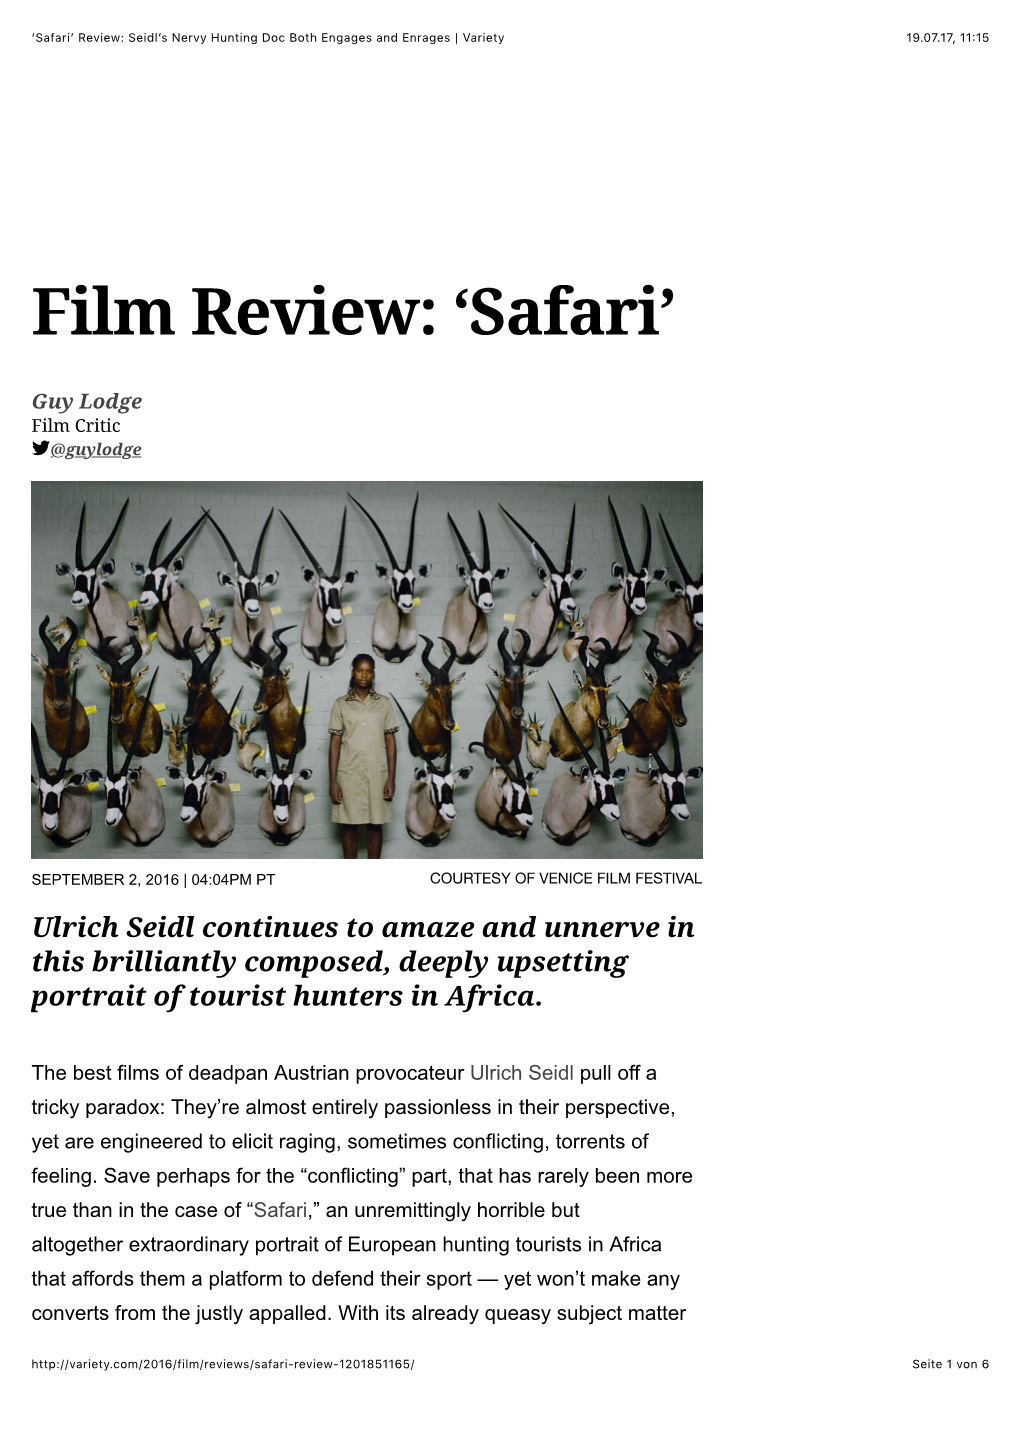 'Safari' Review: Seidl's Nervy Hunting Doc Both Engages and Enrages